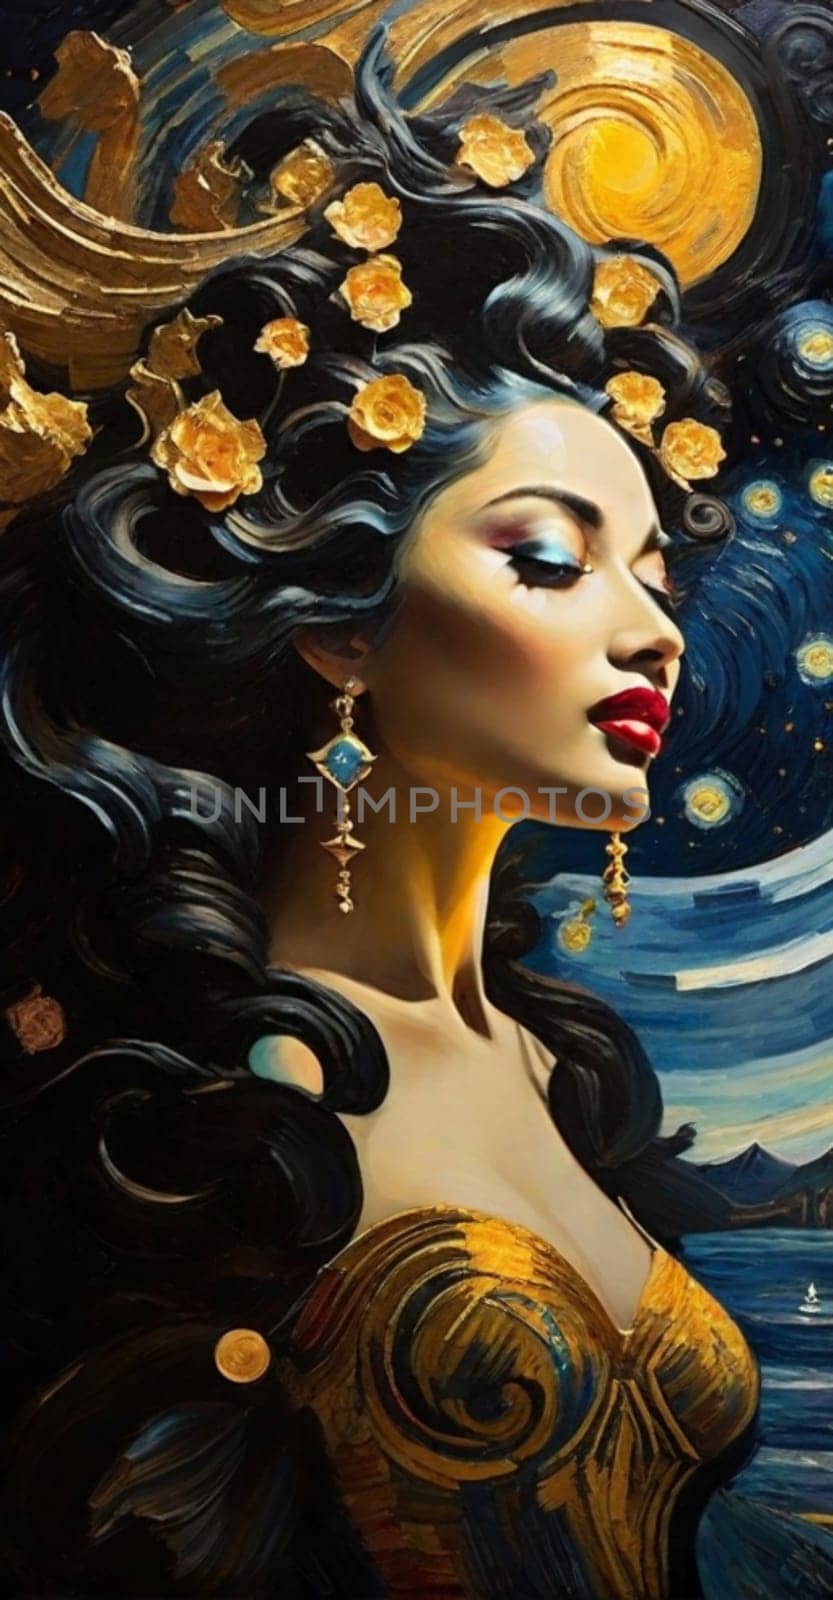 swirling impressionist sky, european village, a carved fantastical womanclose up portrait, gold blue by verbano